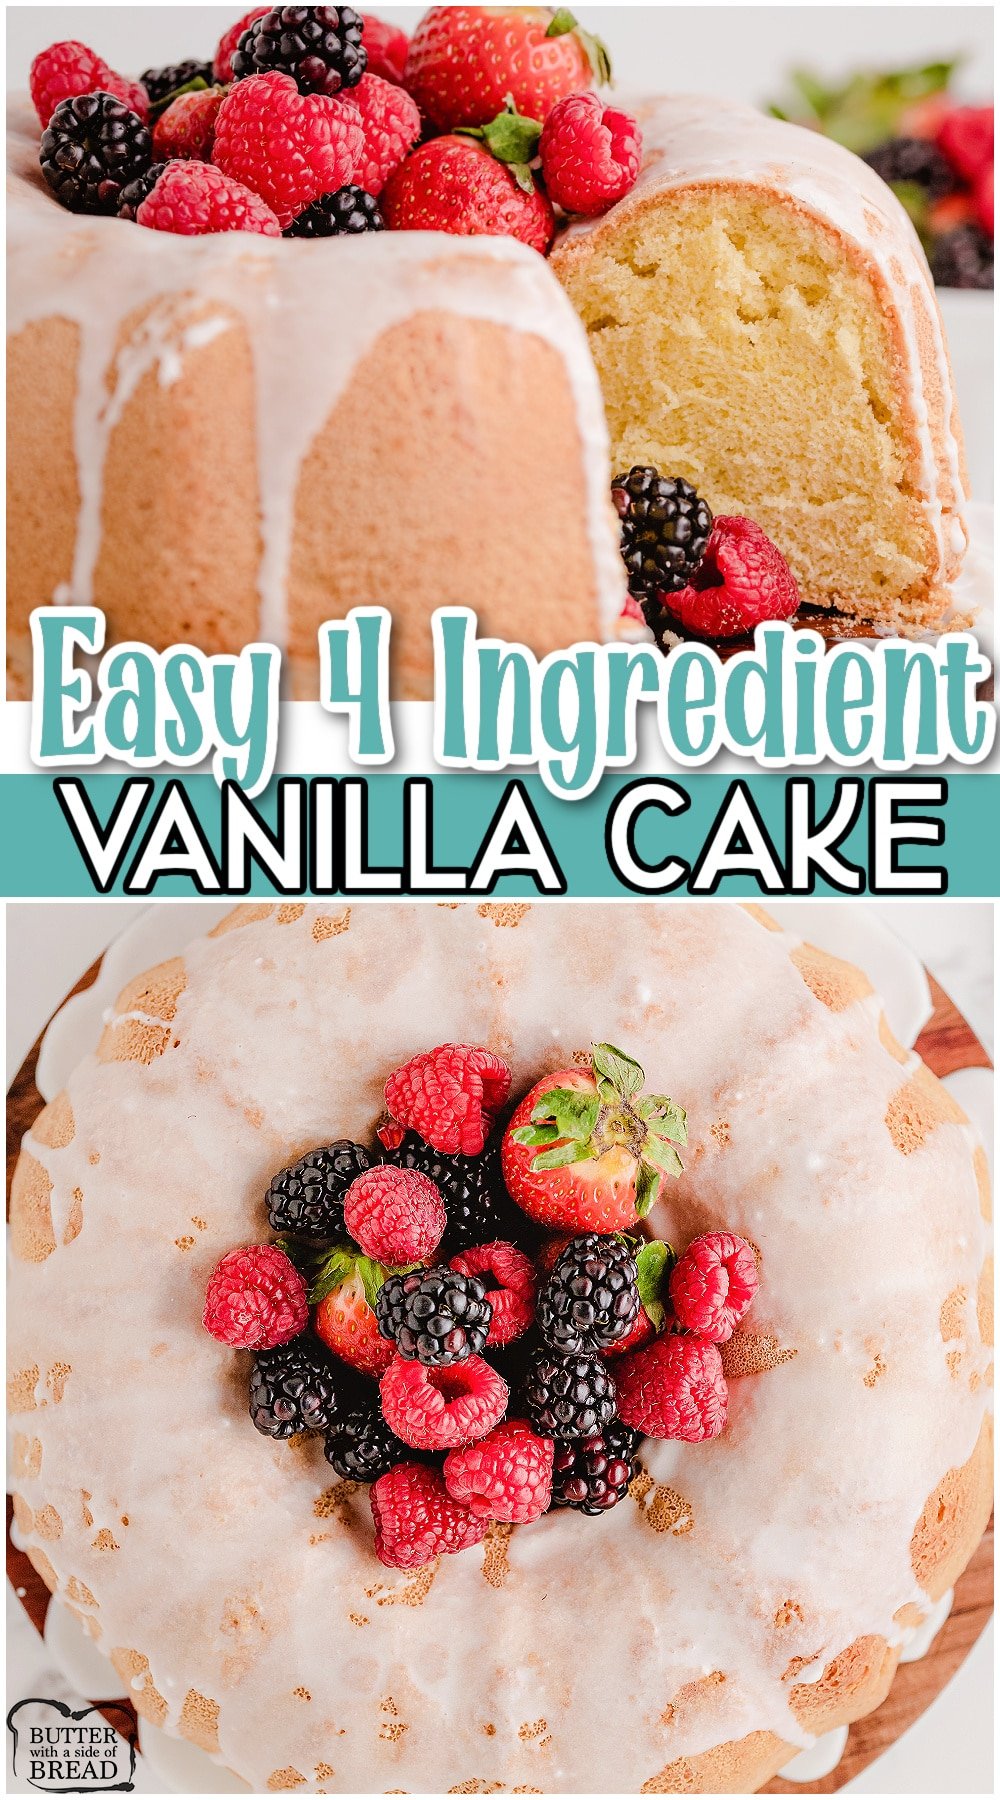 Homemade Vanilla Cake is the easiest homemade cake recipe you will ever make! Just 4 simple ingredients you likely already have on hand: sugar, eggs, flour, and vanilla.